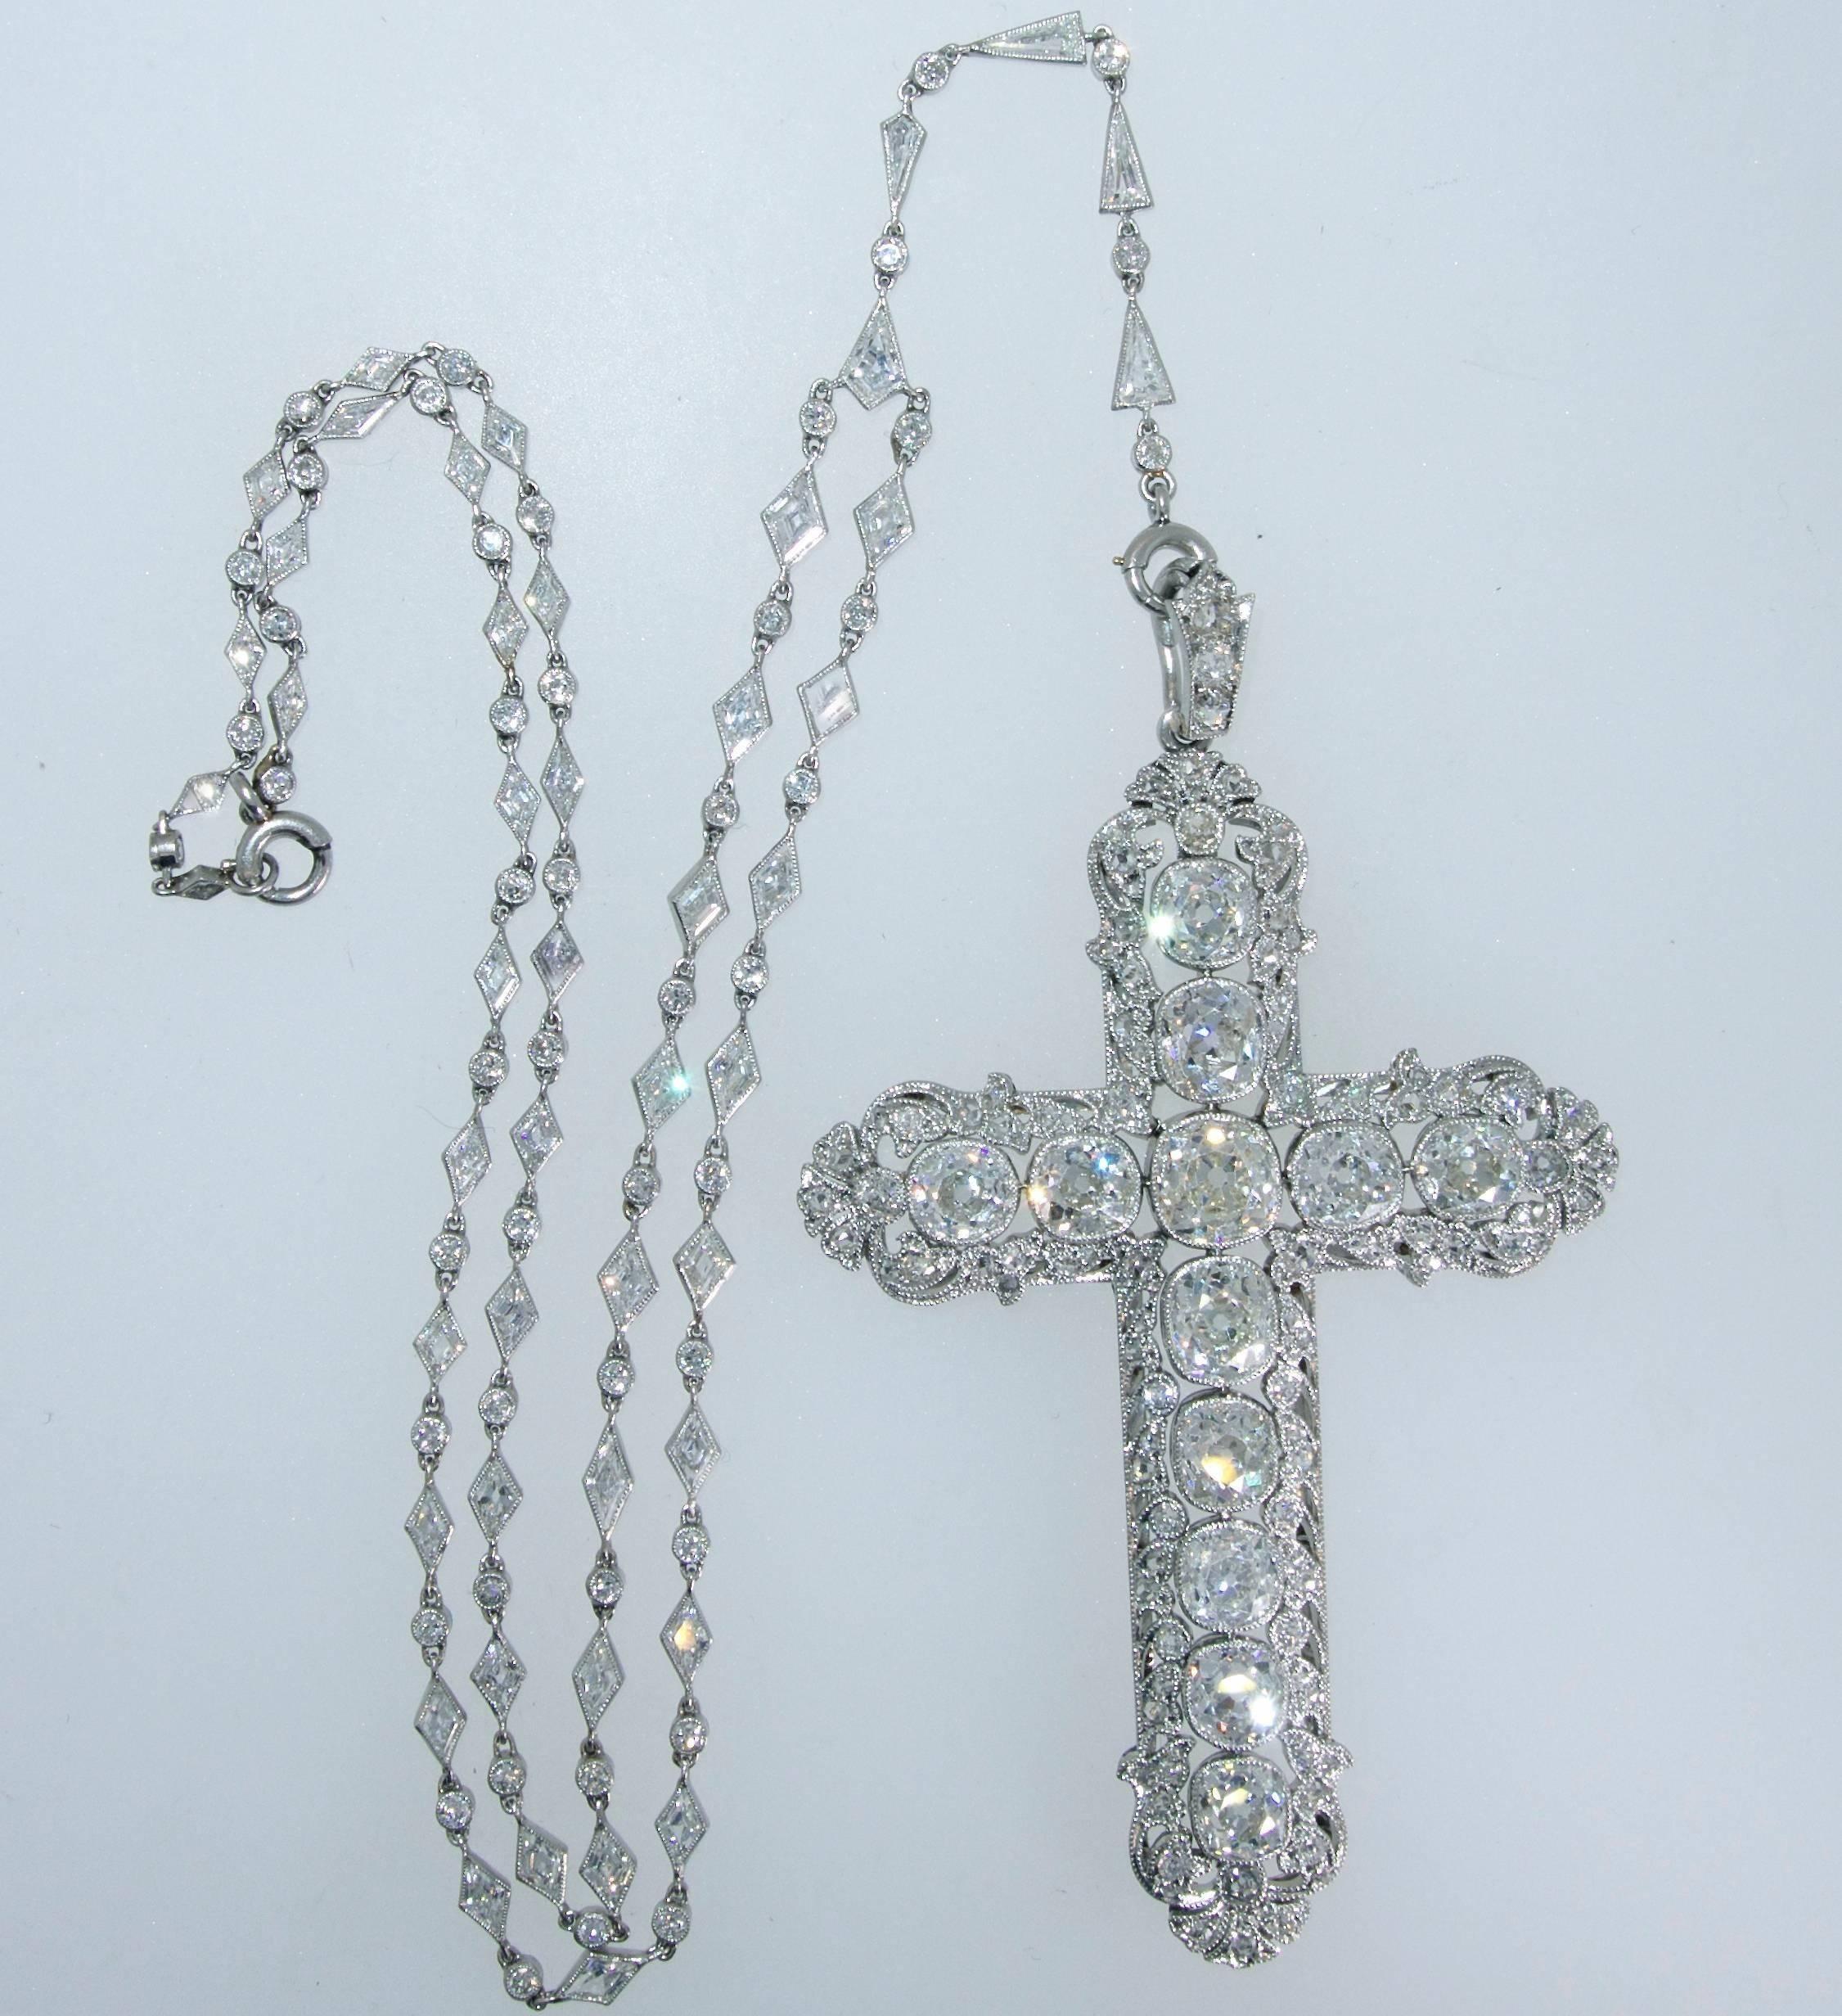 With over 12 carats of European cut diamonds, this is a magnificent antique cross which is suspended on an antique fancy cut diamond chain.  The cross is 3 inches in length and has superb workmanship.  Circa 1900